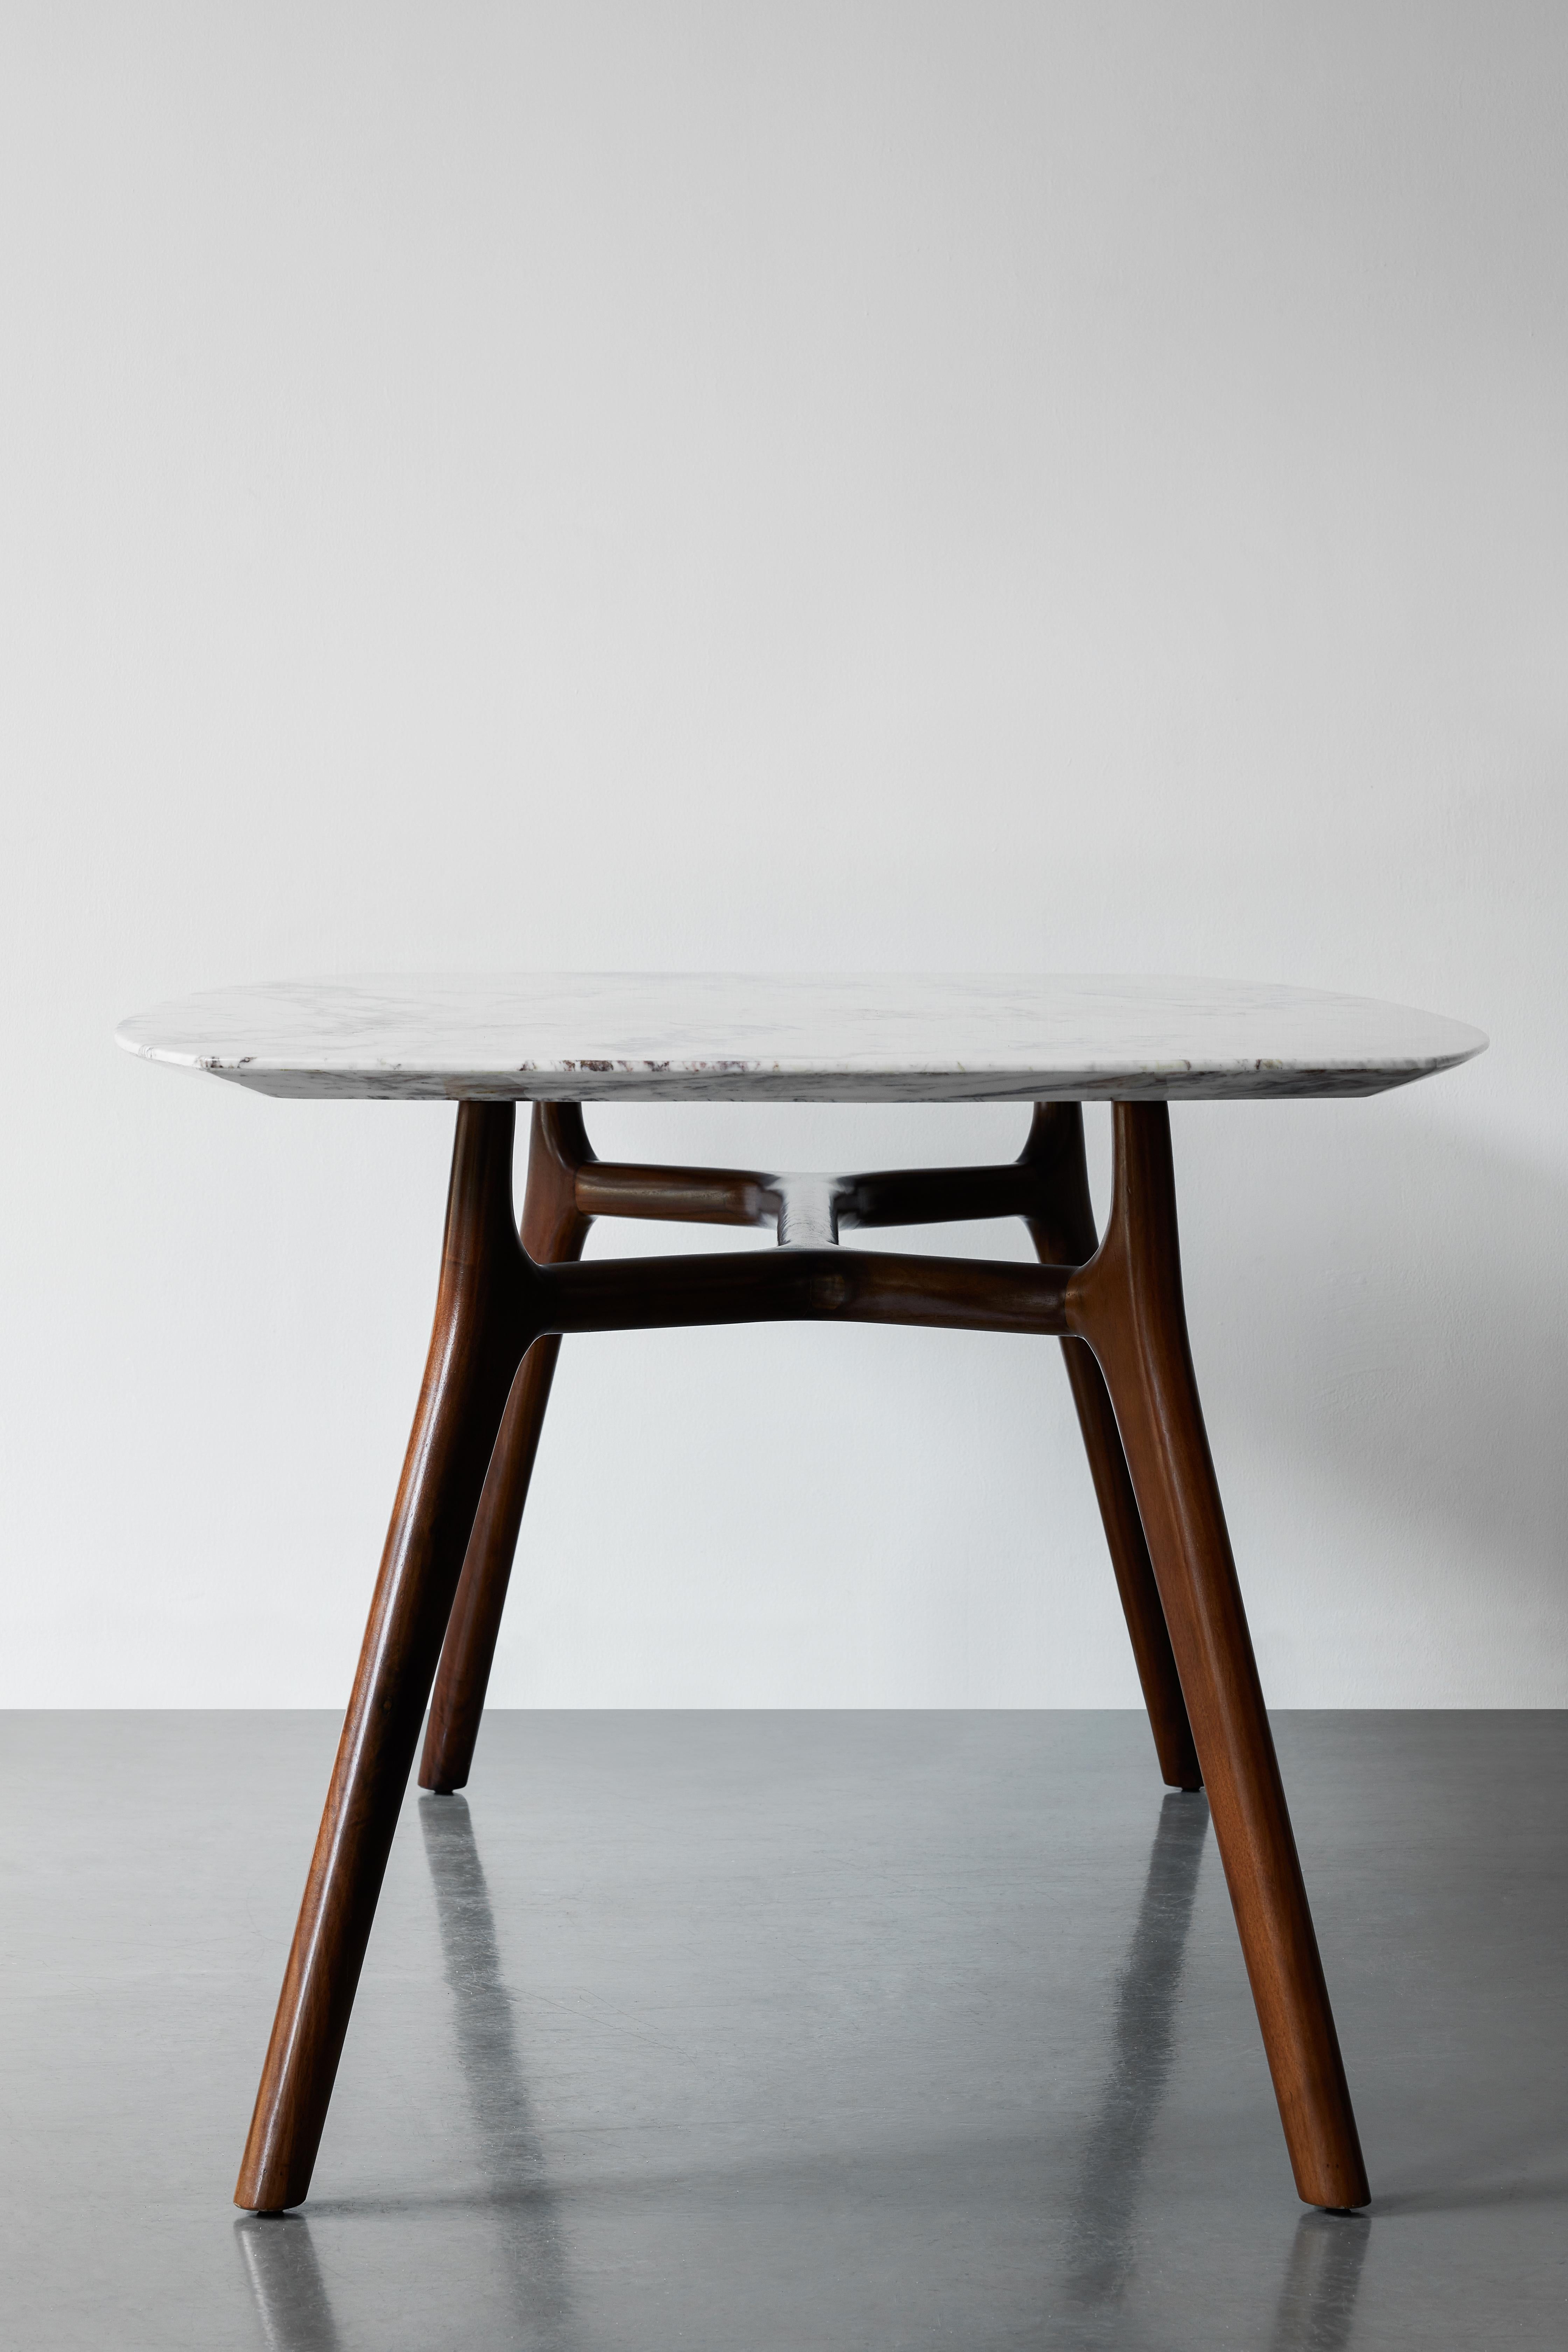 NORDST POUL Dining Table, Italian White Montain Marble, Danish Modern Design In New Condition For Sale In Rungsted Kyst, DK